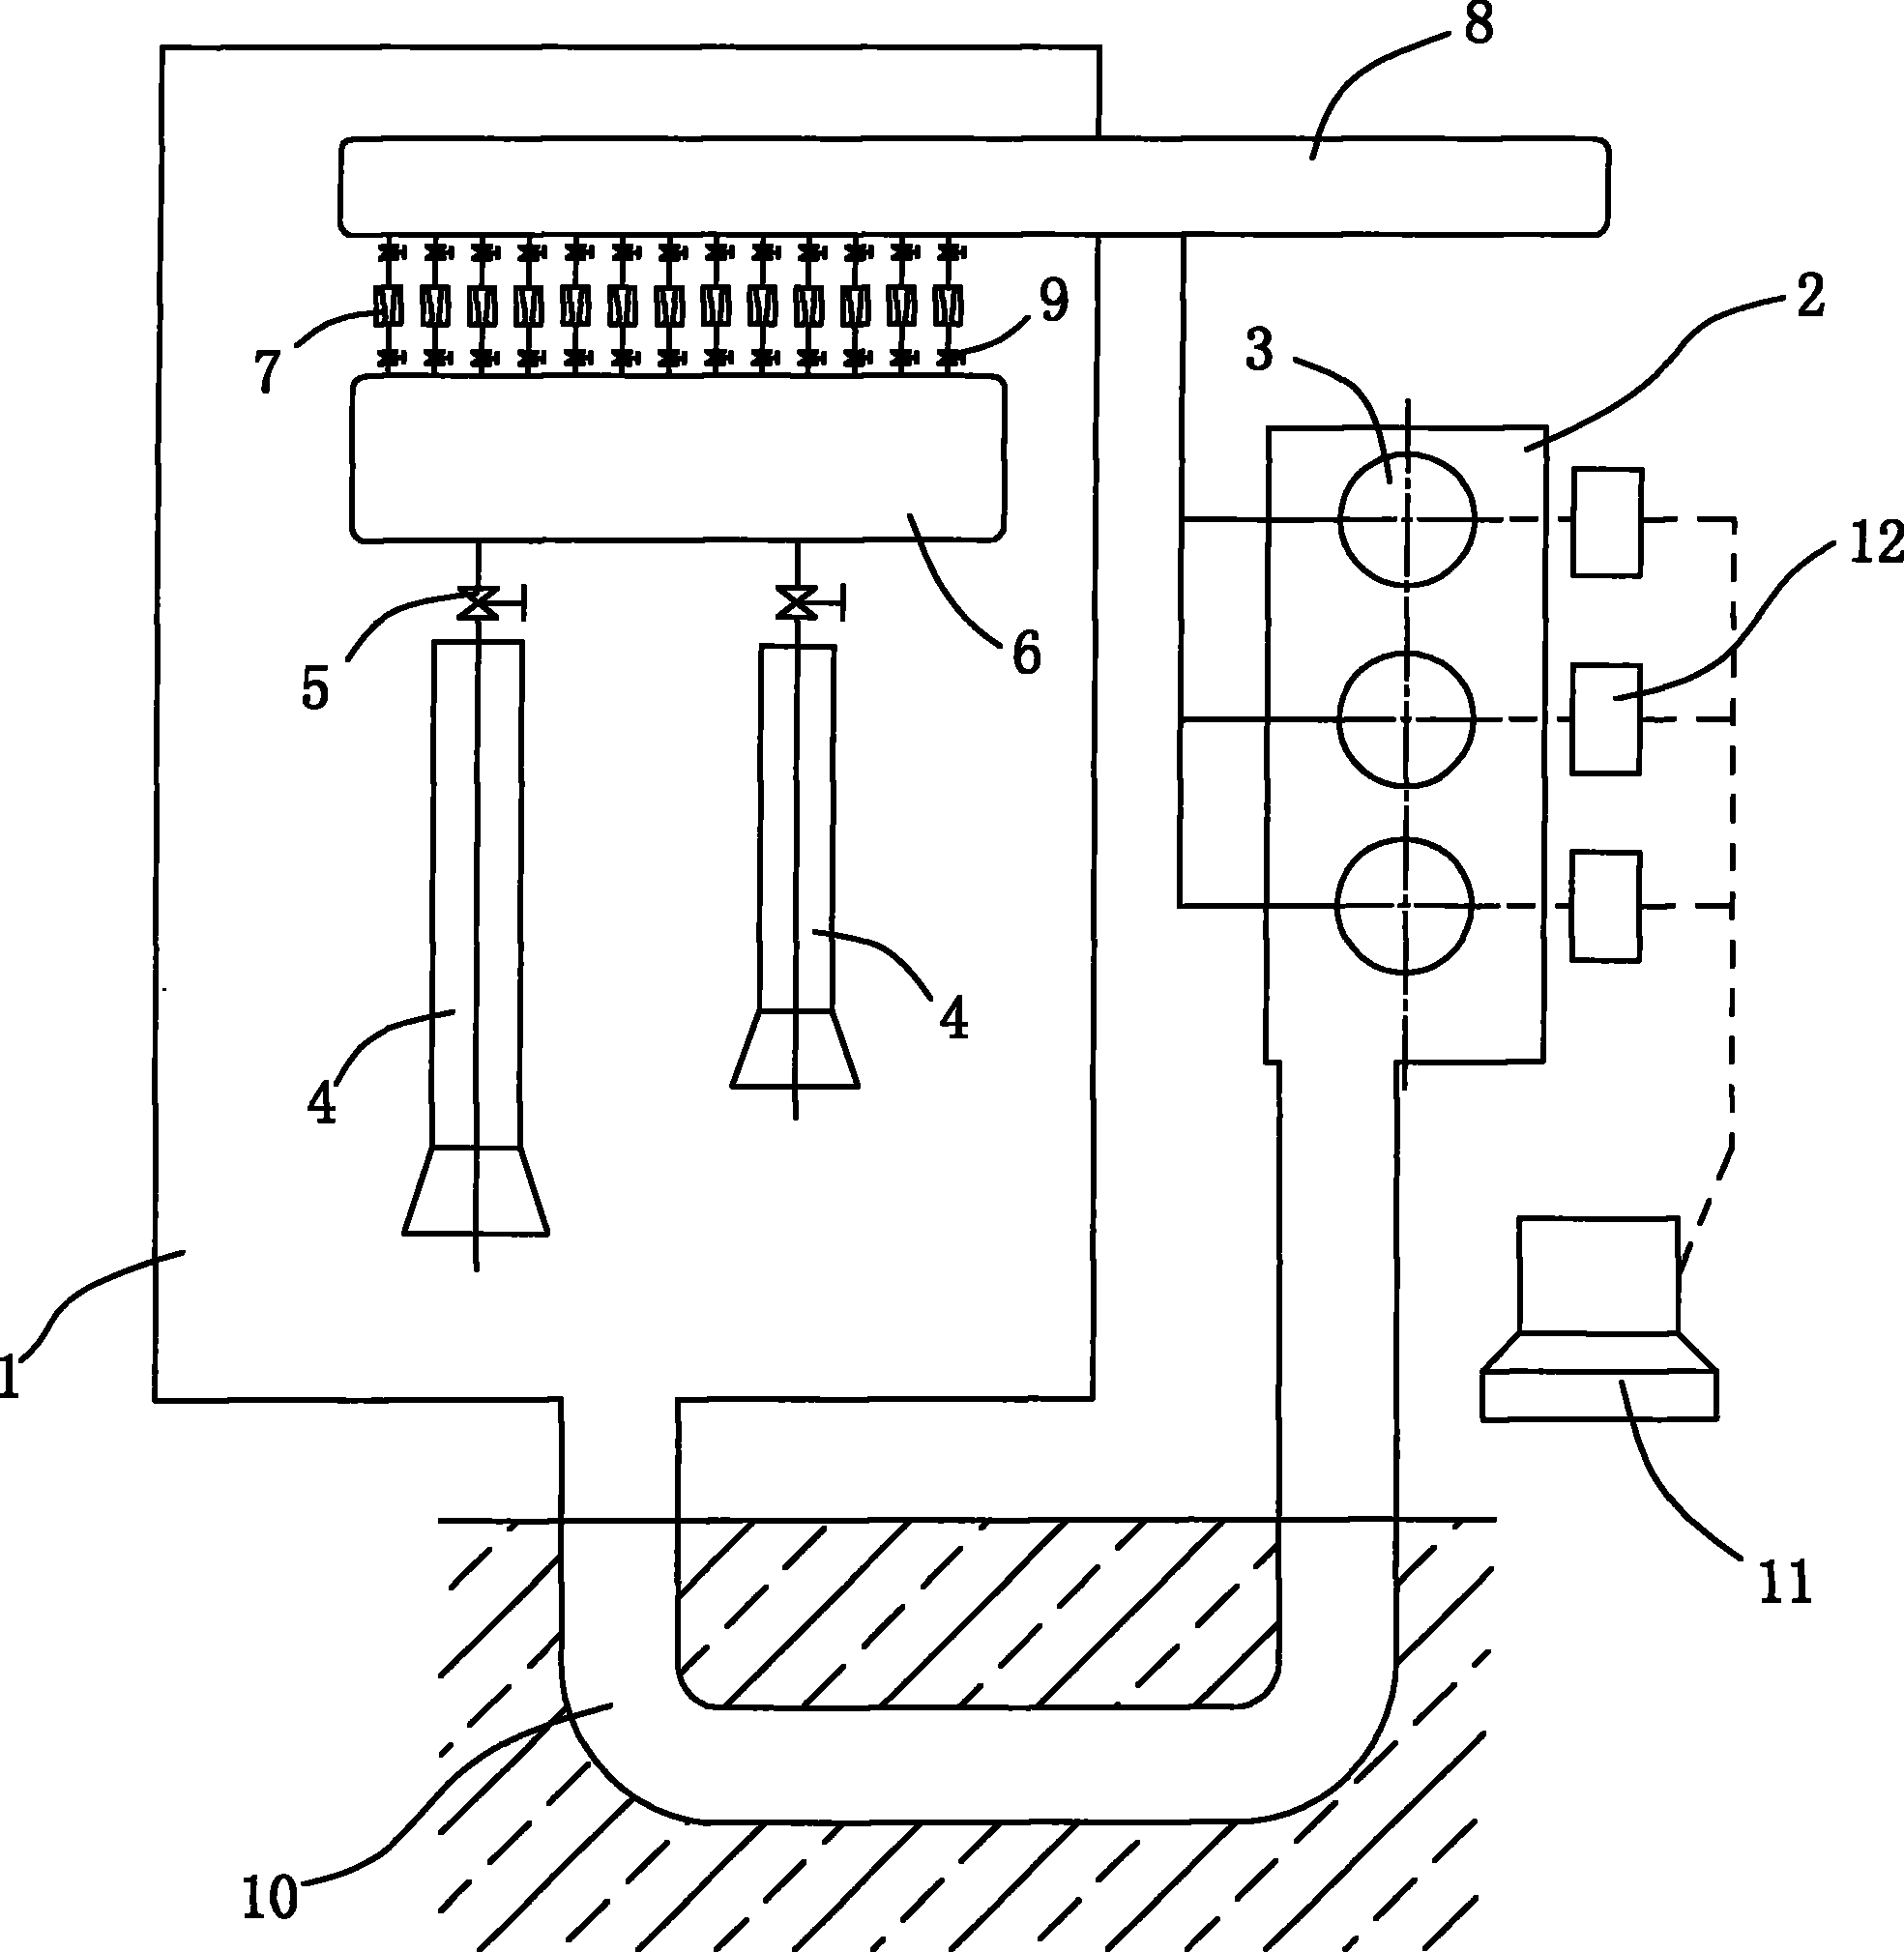 Apparatus for calibrating gas instrument